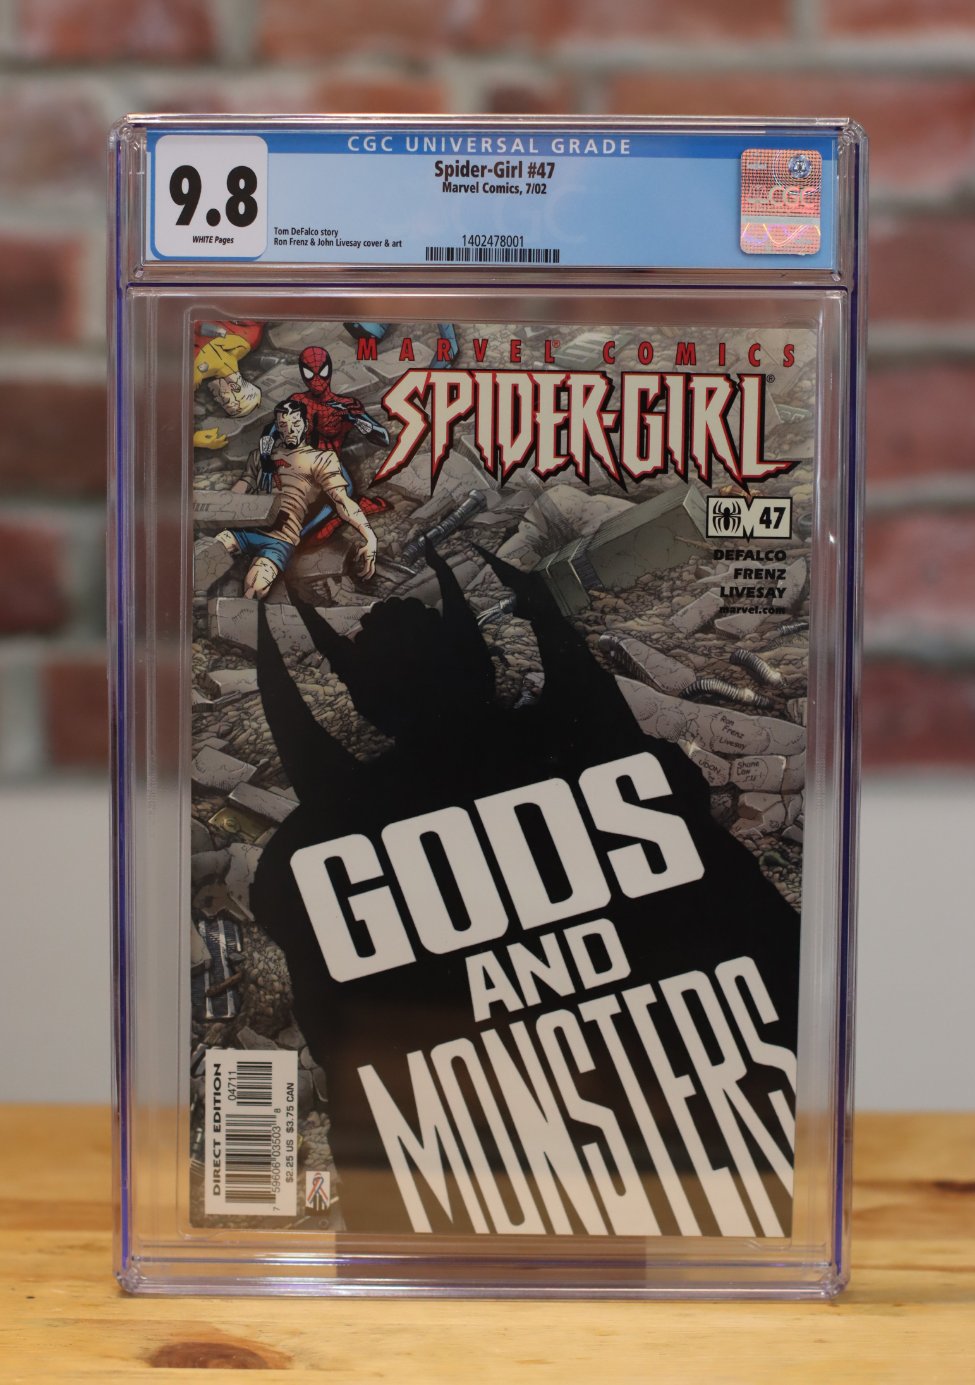 Spider-Girl #47 Graded CGC 9.8 Marvel Comic Book Gods And Monsters Issue